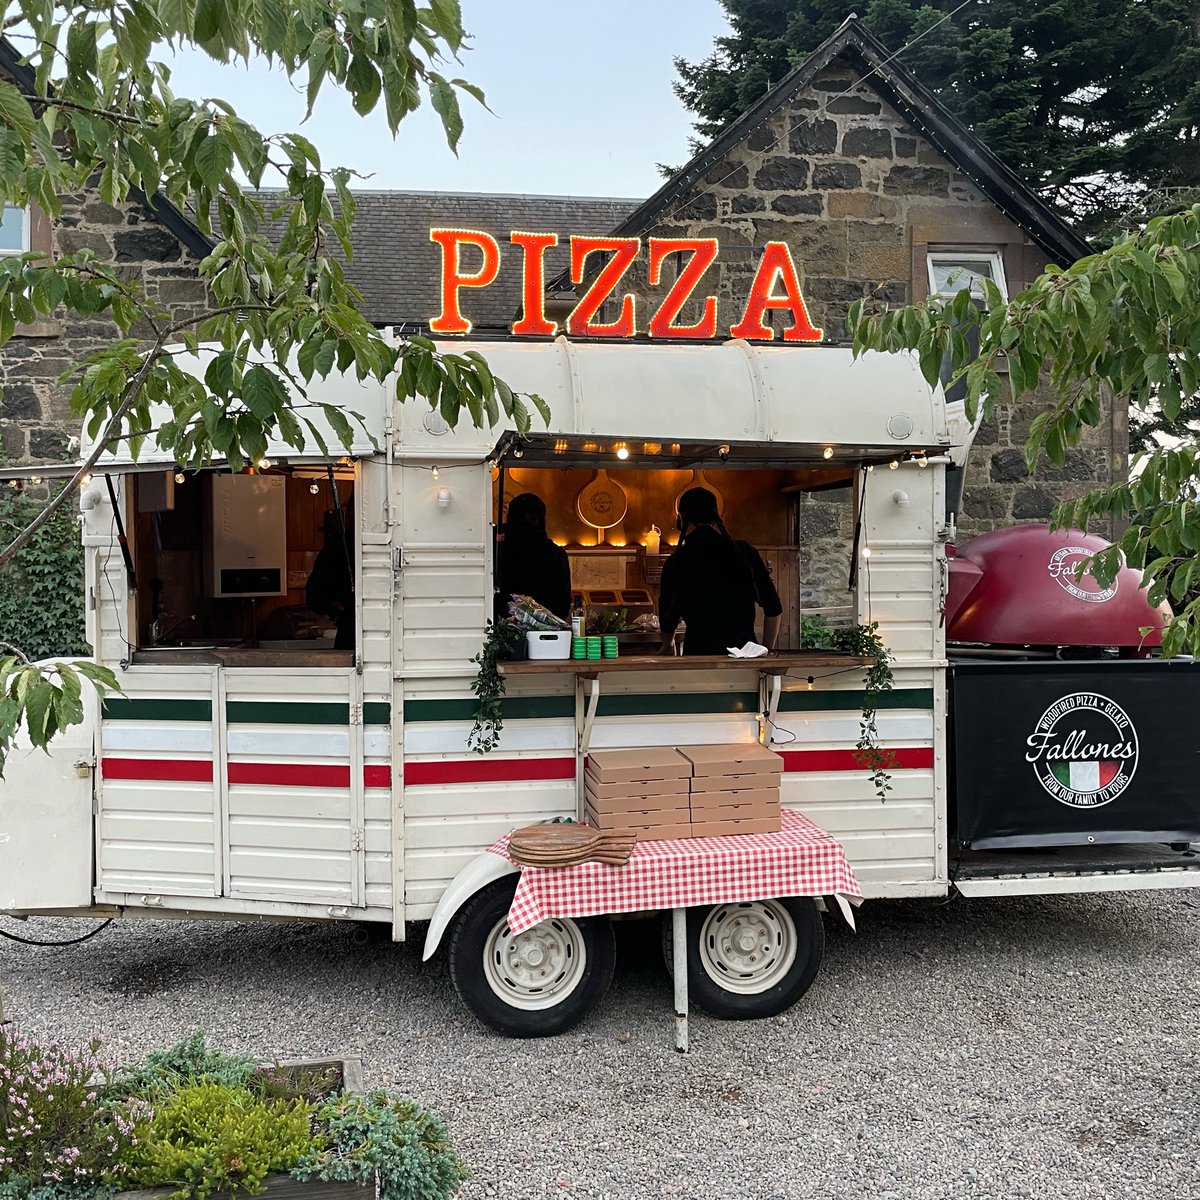 Weddings at @comriecroftwed1 

For the perfect relaxed table-service of Italian street-food based catering get in touch. We have space in our diary for 2023. 

#Woodfiredpizza  #familybusiness #vintagehire #weddingcatering #italianfood  #neapolitanpizza  #italiancaterer